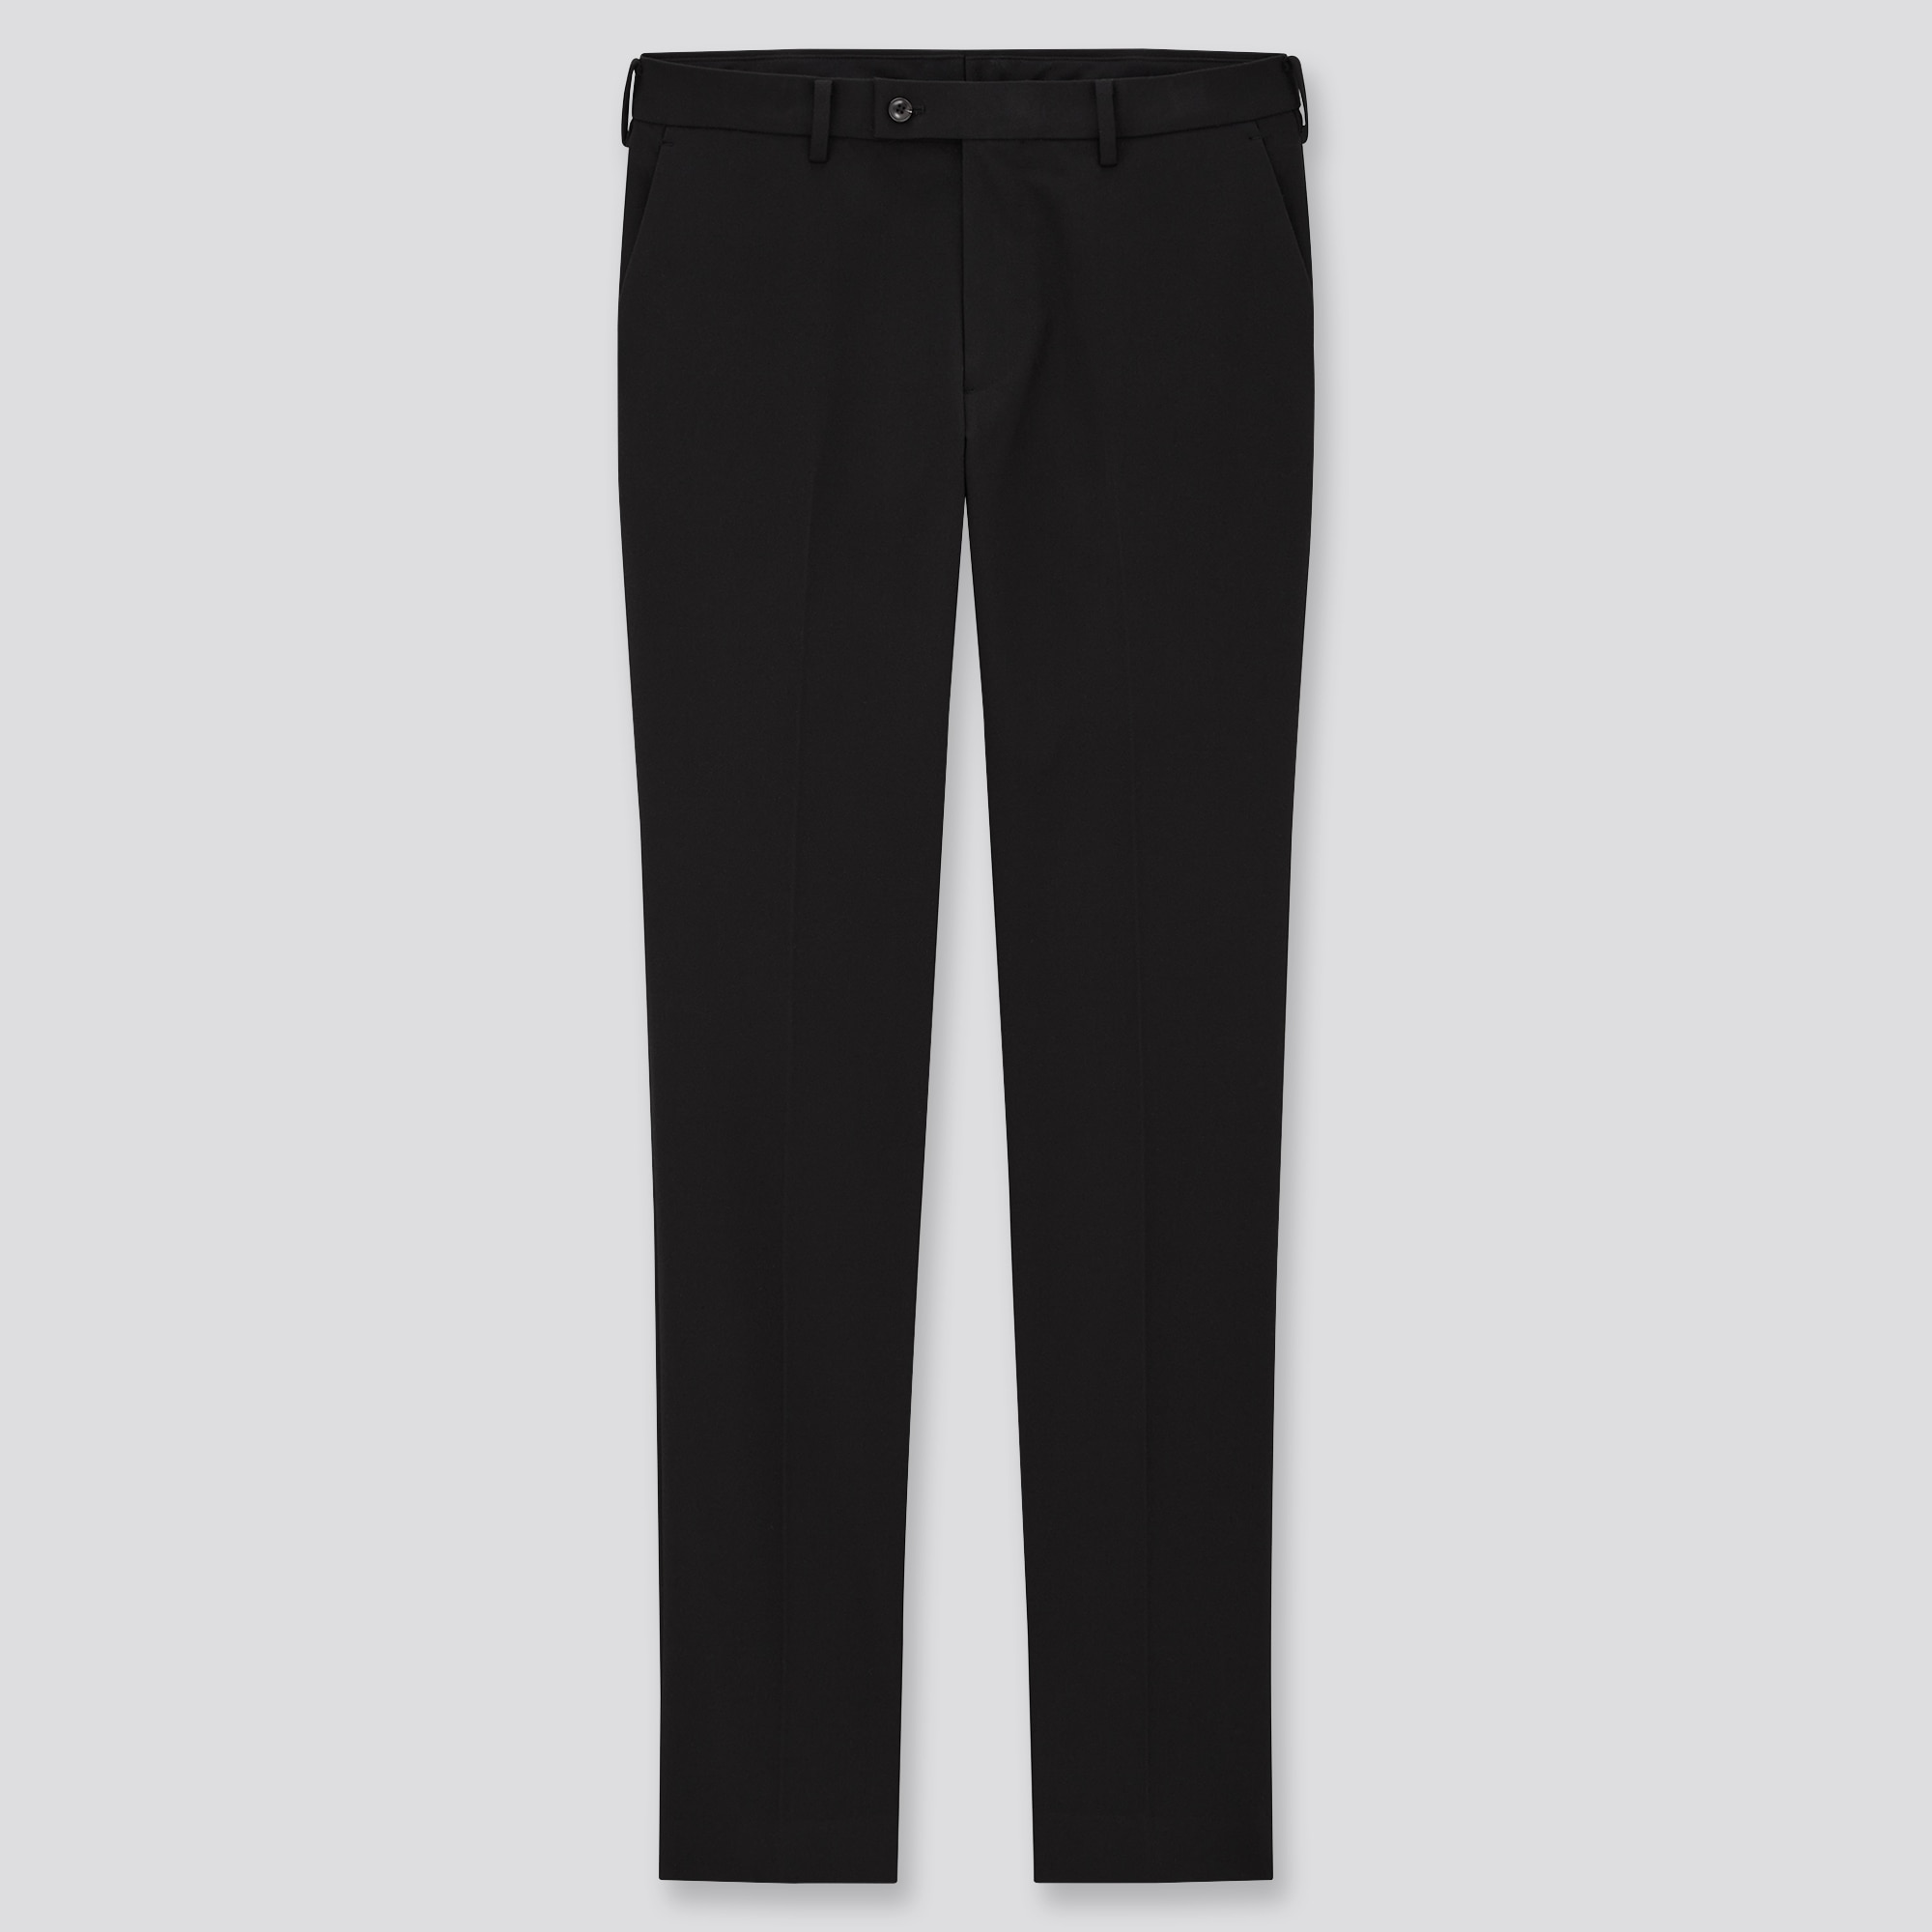 UNIQLO Philippines on Twitter Face lower temperatures in comfort when you  travel to cold places with our HEATTECH Warm Lined Pants These bottoms  feature sleek and stylish fits with biowarming HEATTECH fleece